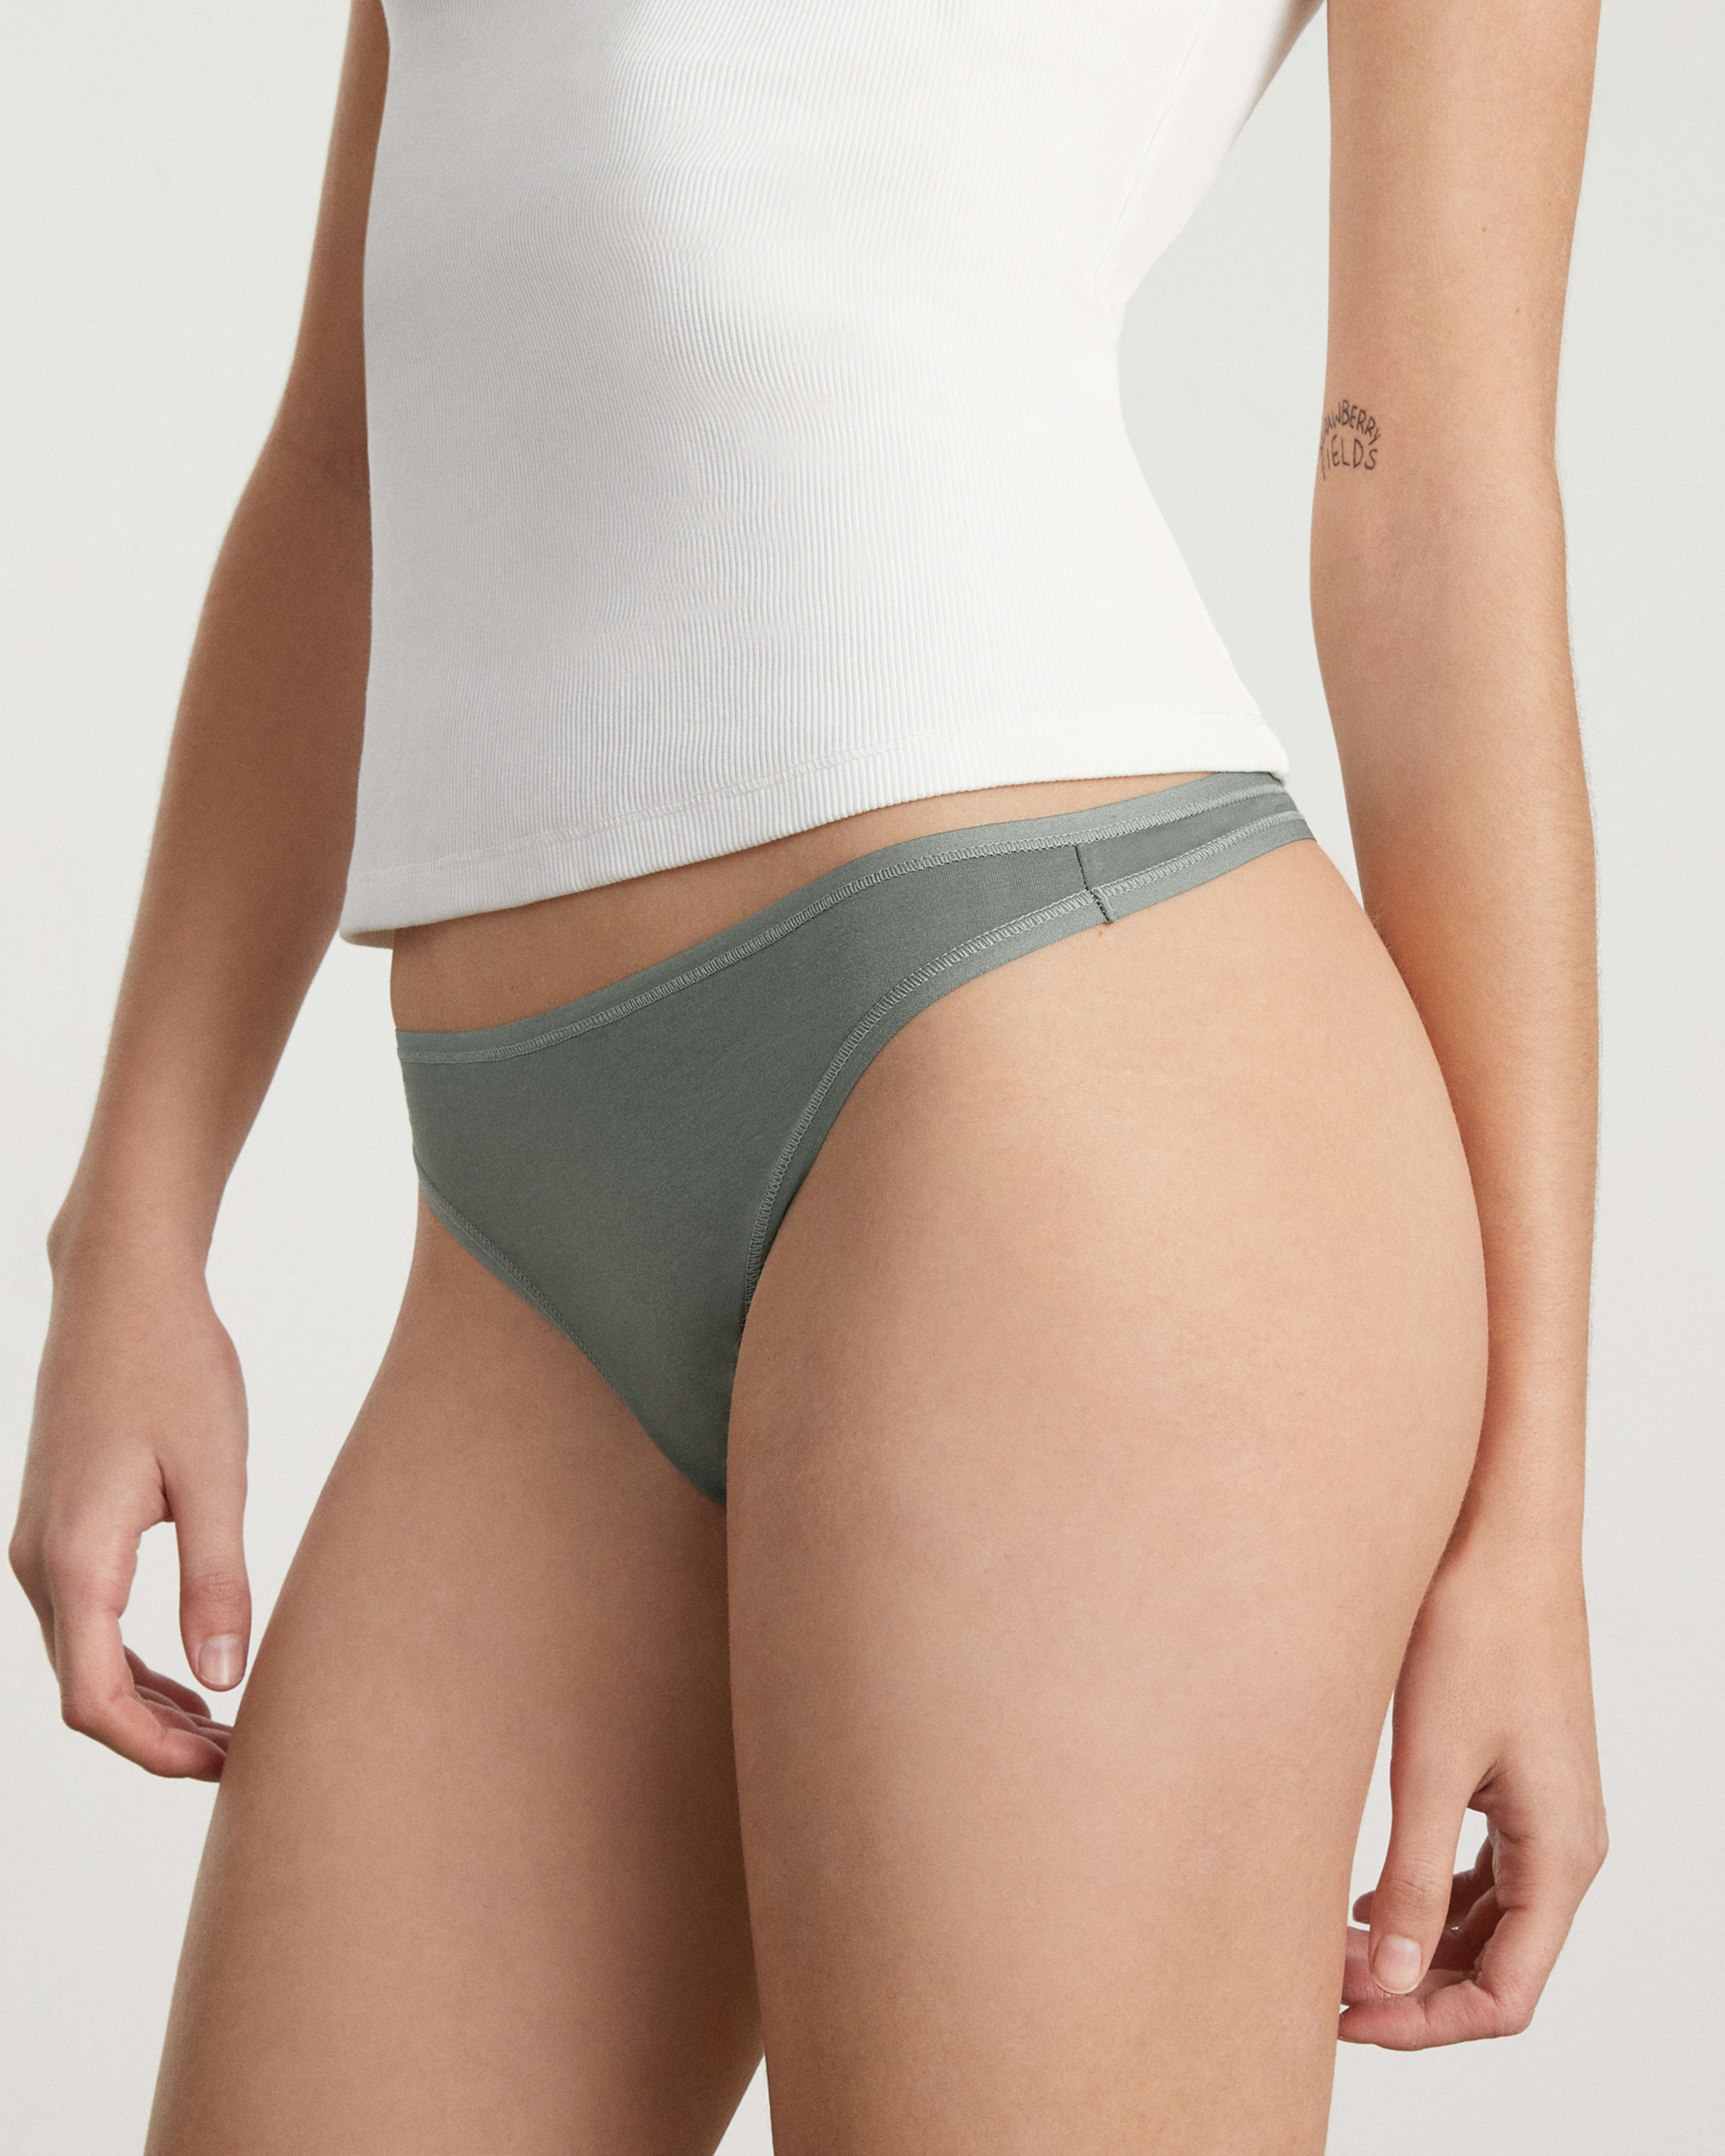 Review: 5 Women Try Everlane's ReNew Underwear and Bra Collection